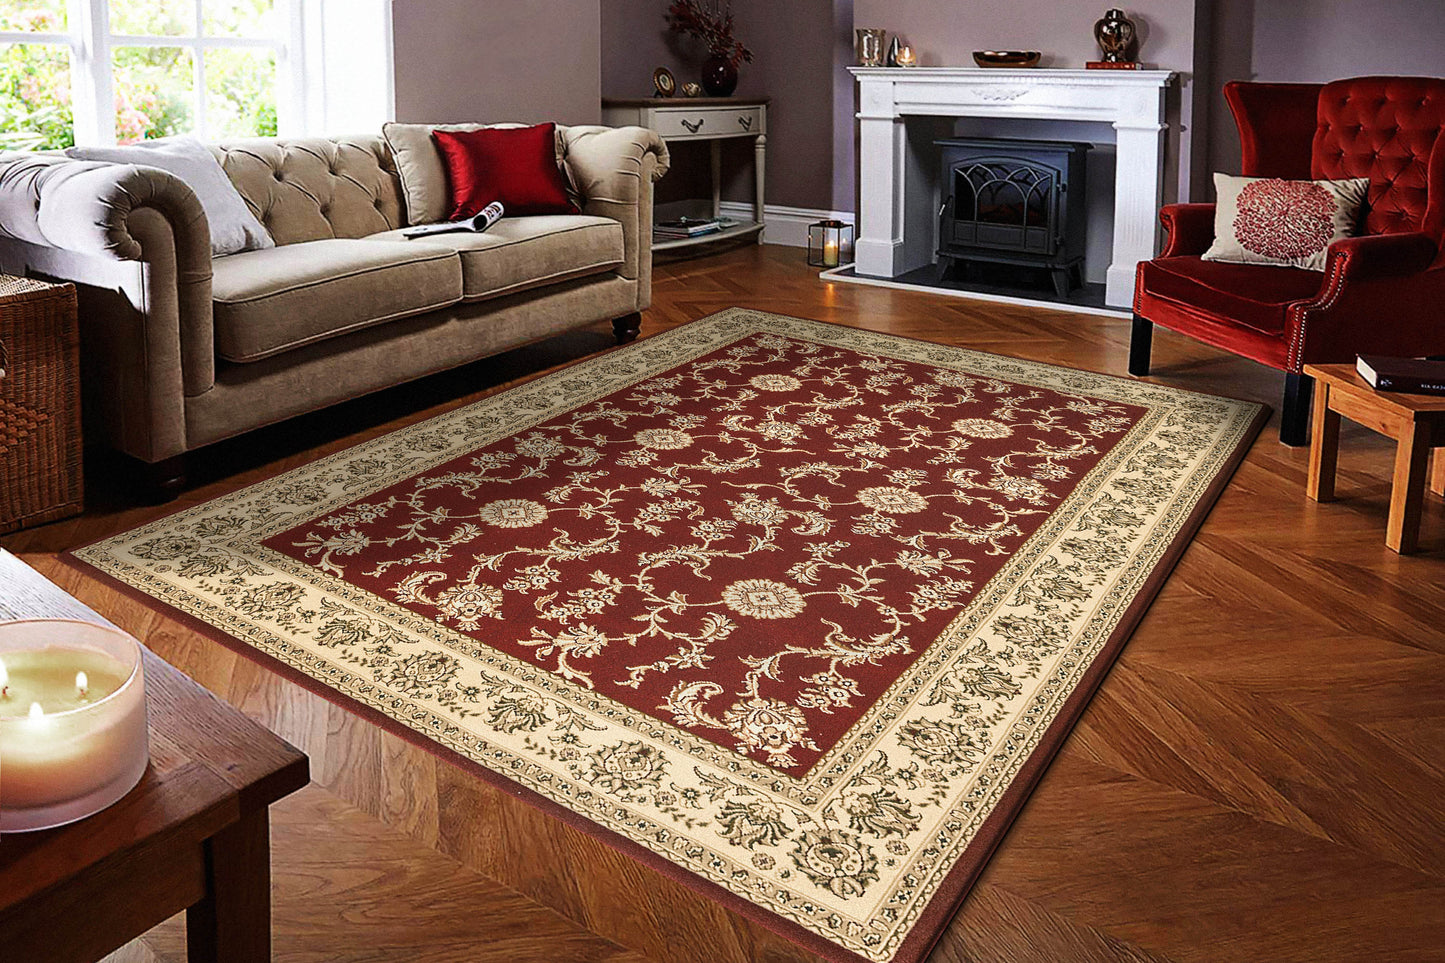 Dynamic Rugs LEGACY 58017 Red Area Rug